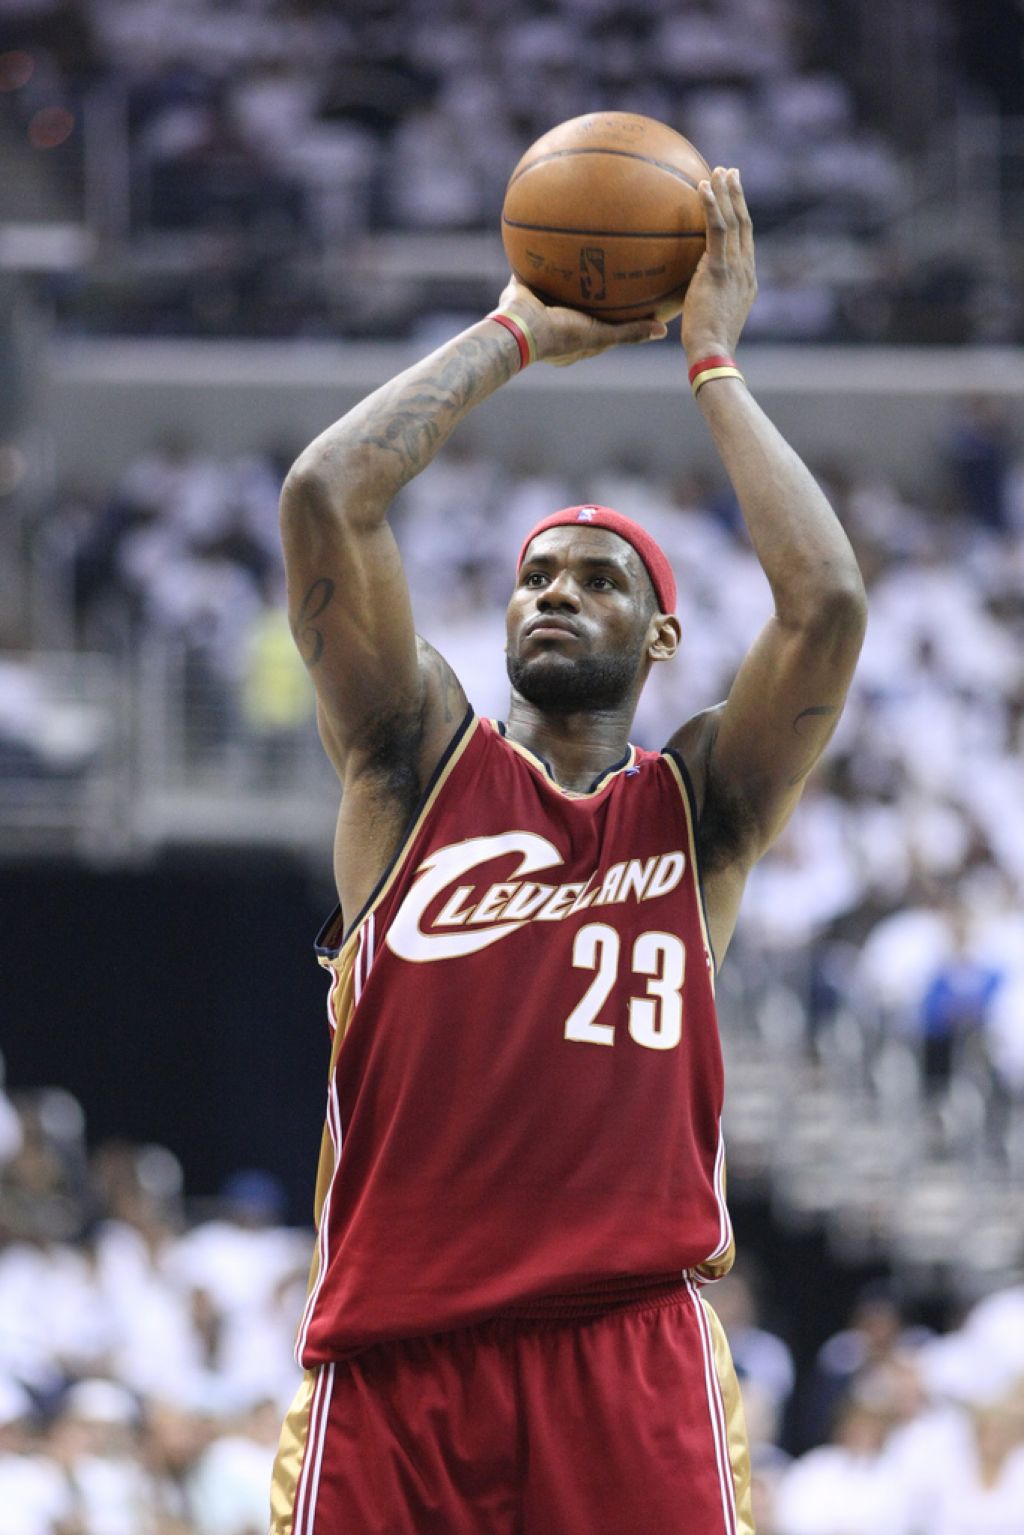 lebron james10 LeBron James   Sportsman of the Year 2012 by Sports Illustrated